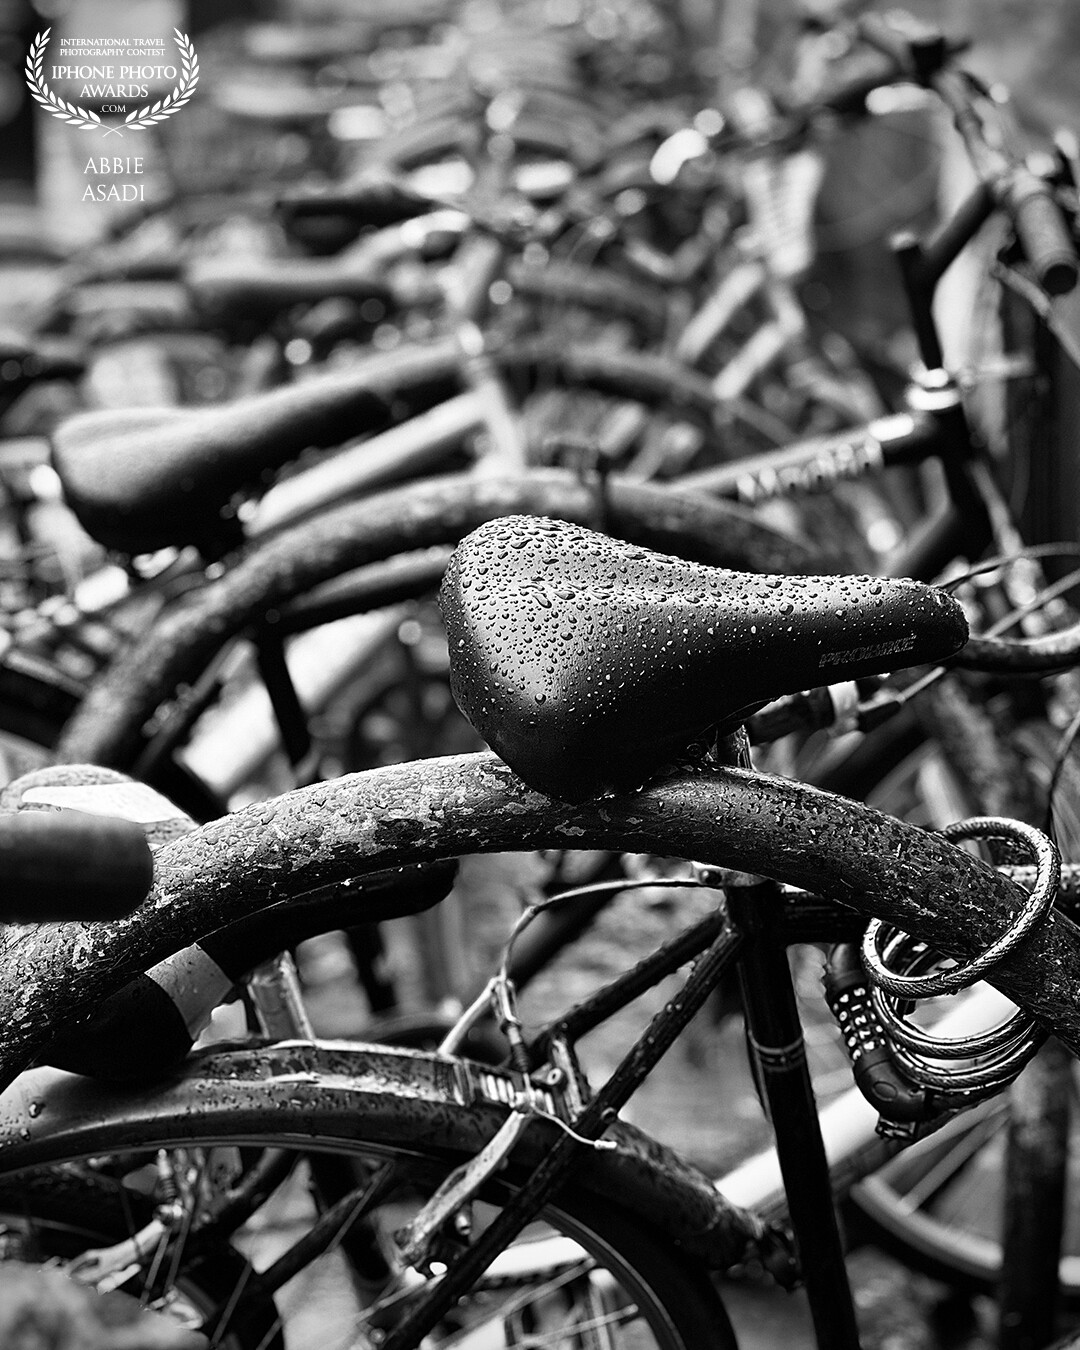 A wet day in Oxford, UK and capturing the dew drops on the sea of bicycles that adorned the street opposite the doors of one of the famous colleges.